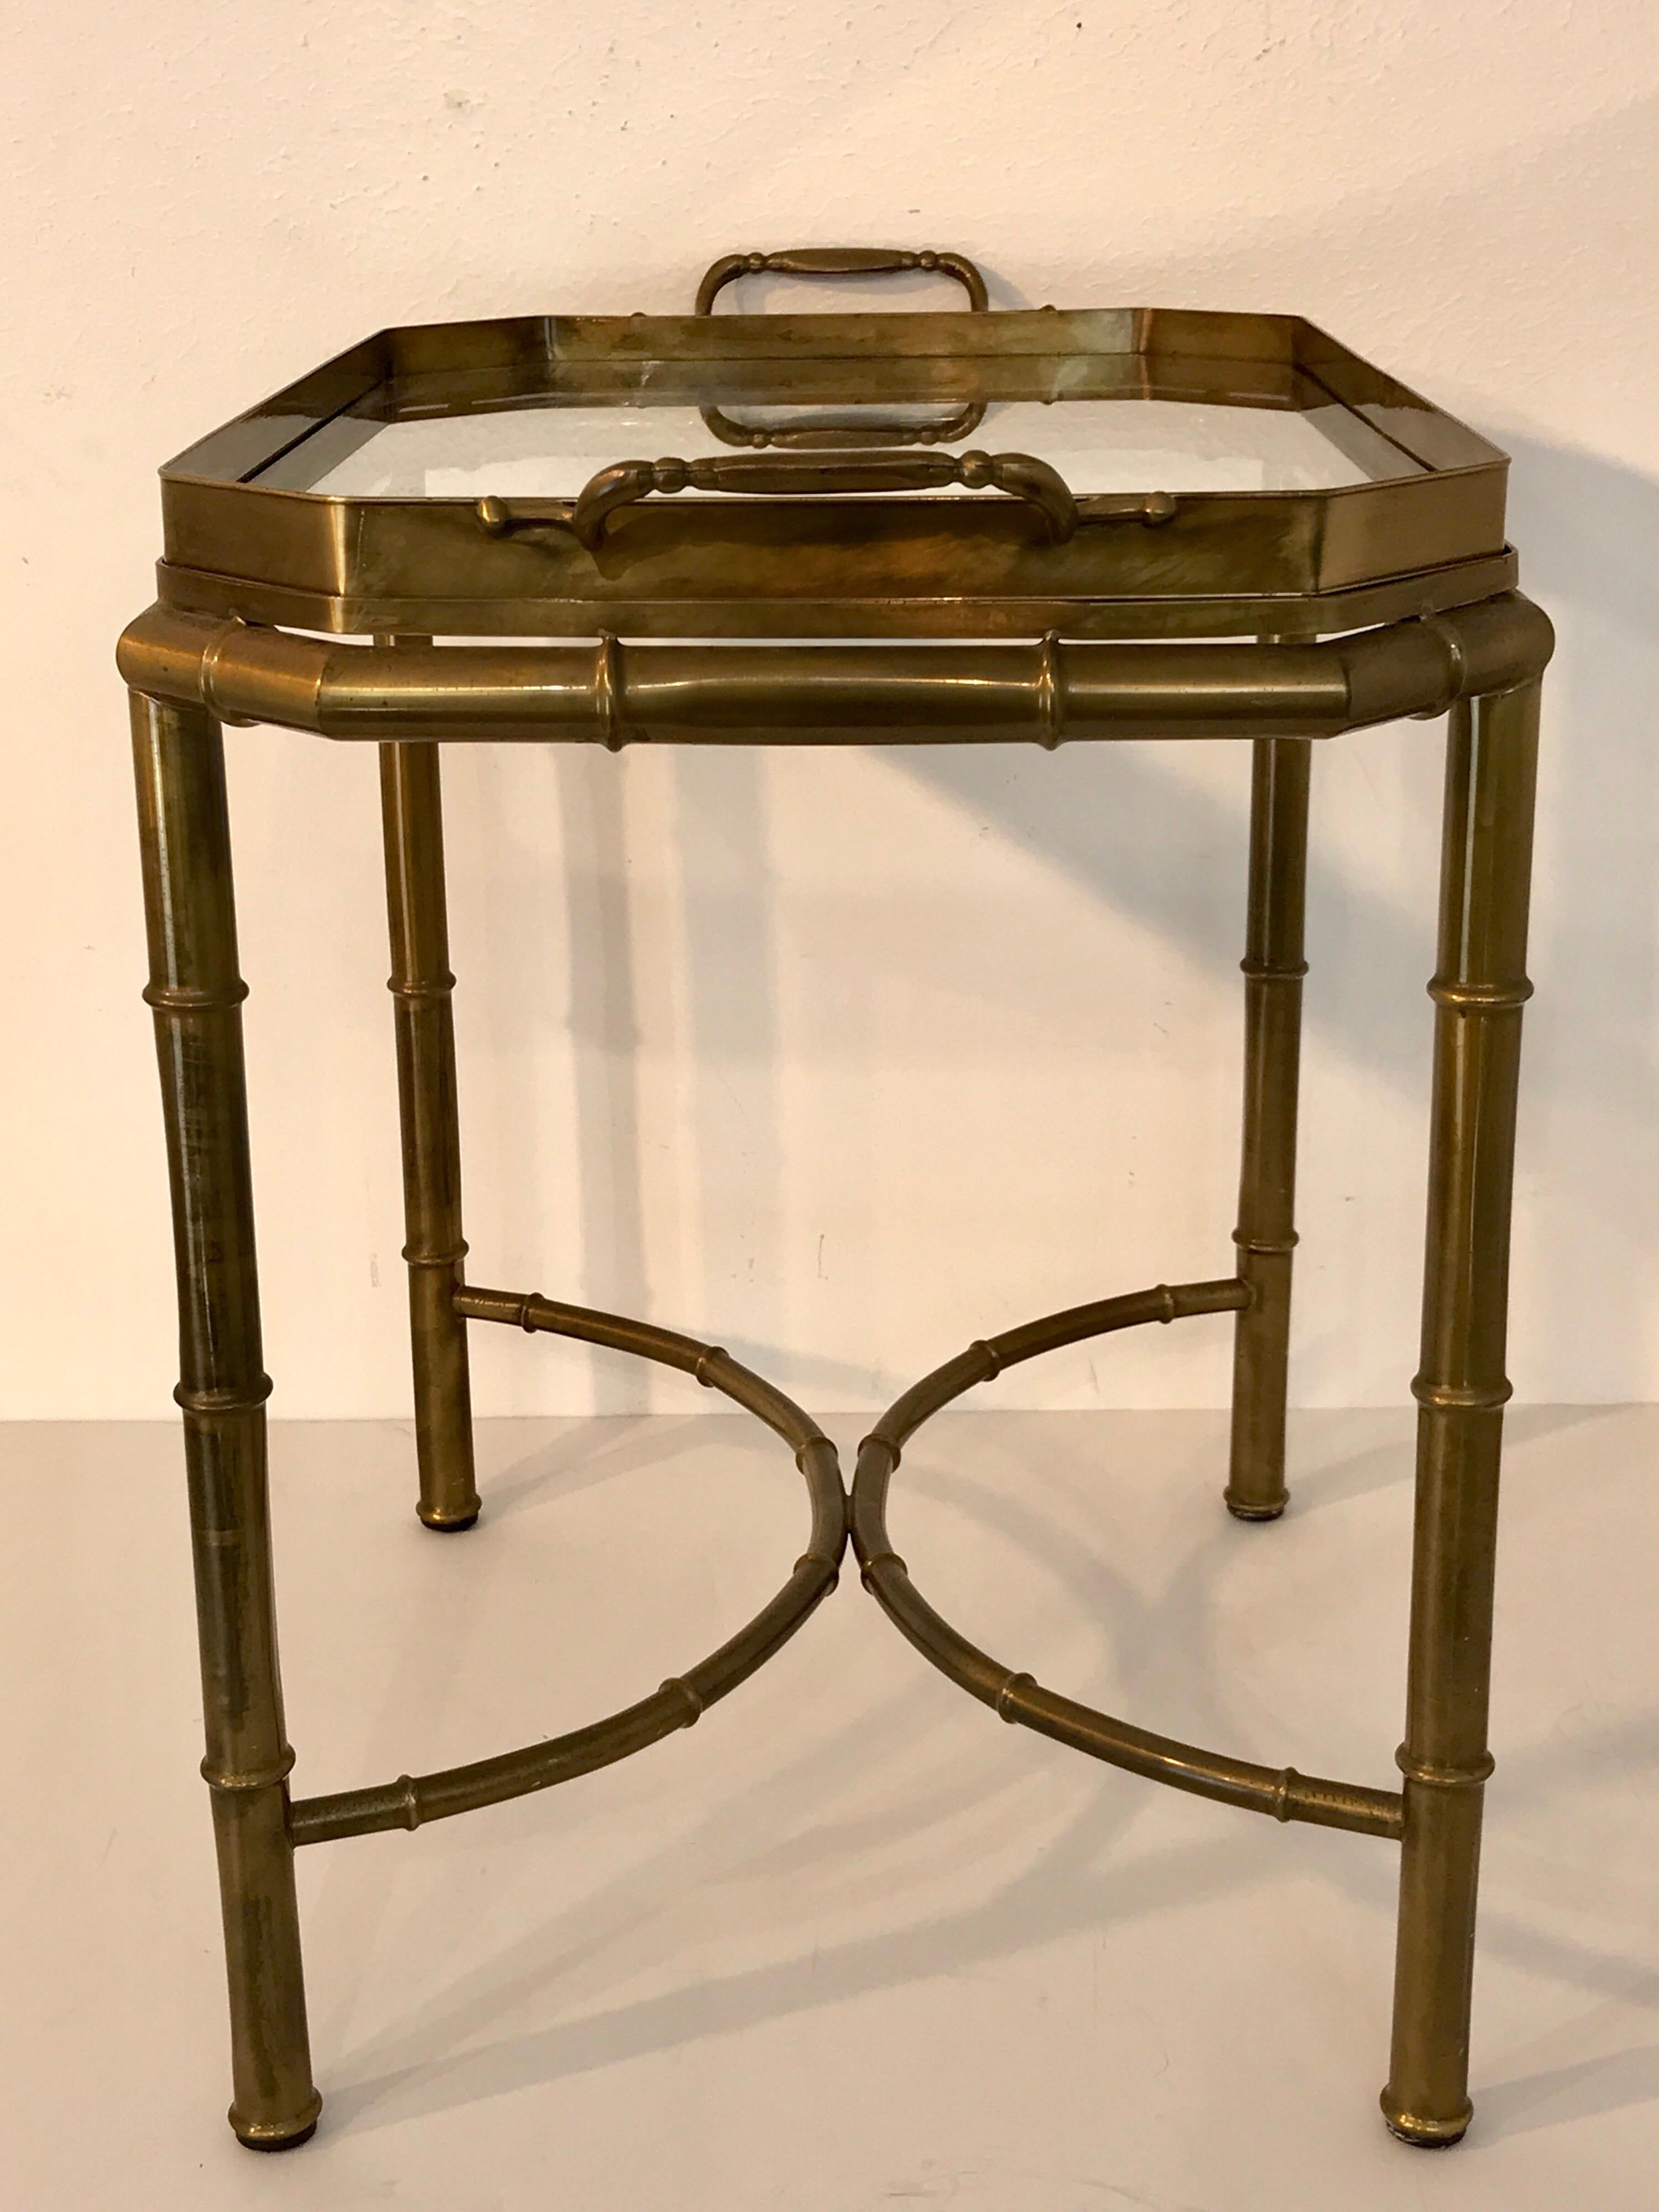 Faux Bois Campaign style patinated brass tray table, by Mastercraft. In two parts with removable 26